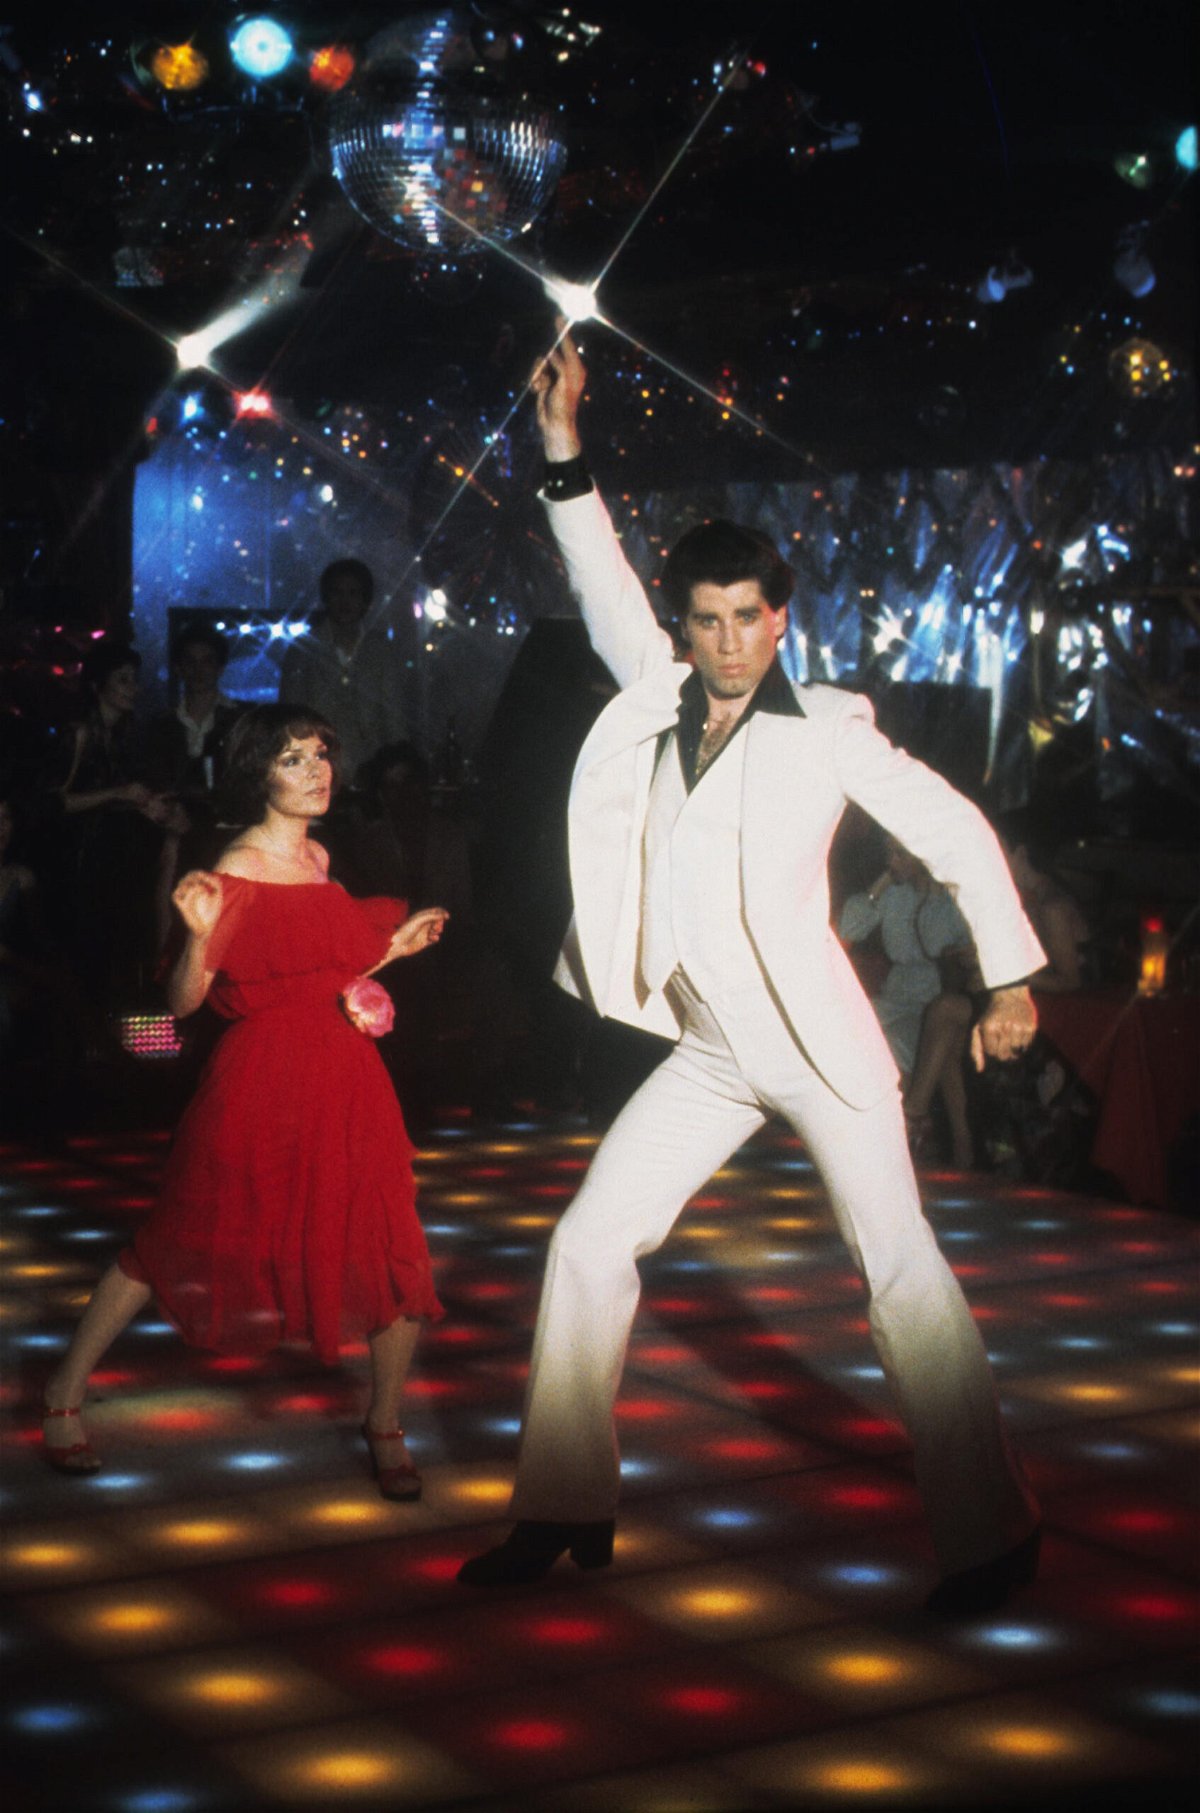 <i>Holly Bower/Paramount/Kobal/Shutterstock</i><br/>Travolta wore the white suit in the film's famous dance competition scene.